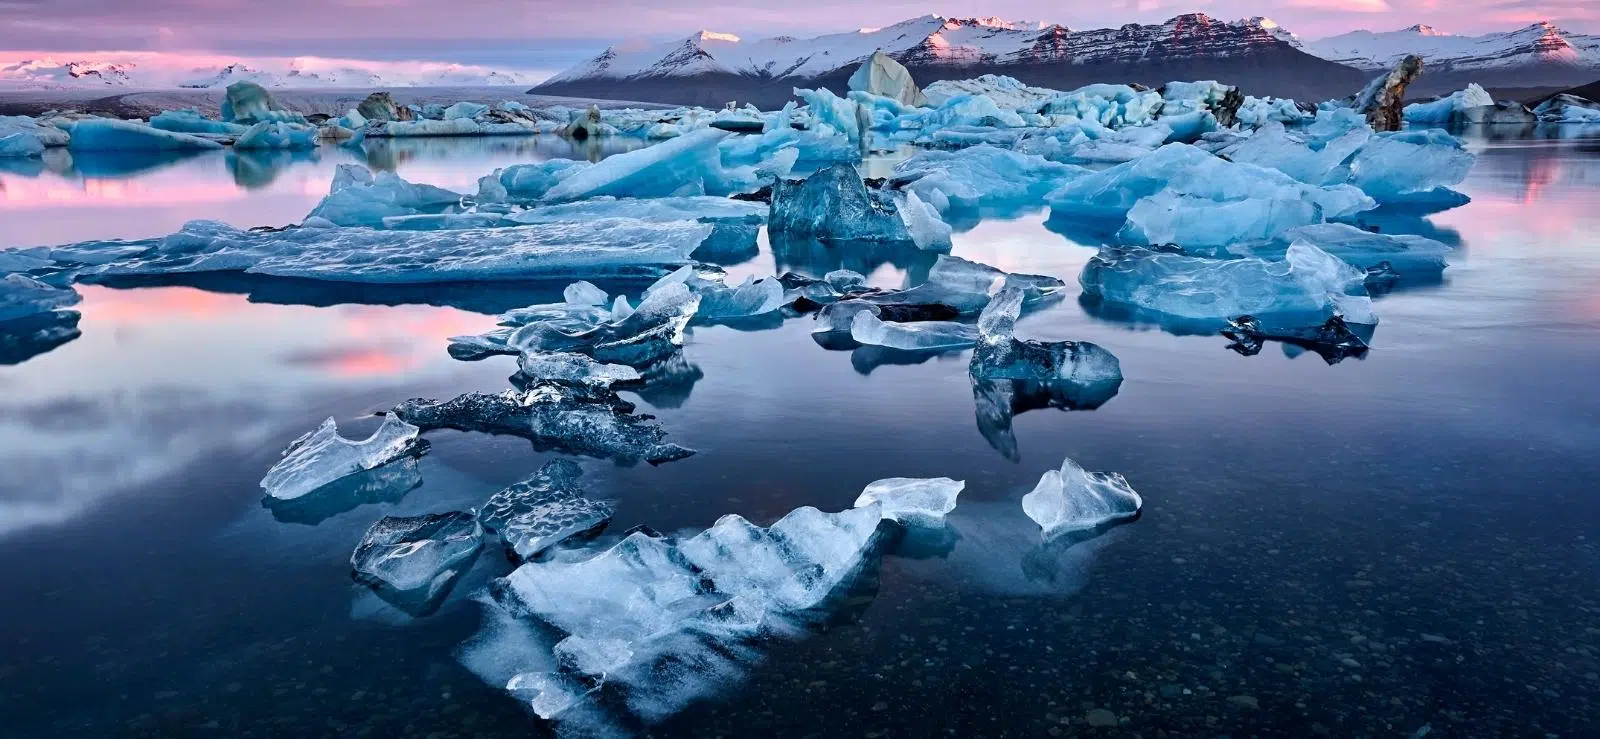 Diamond Beach Iceland: Your Ultimate Guide 2022